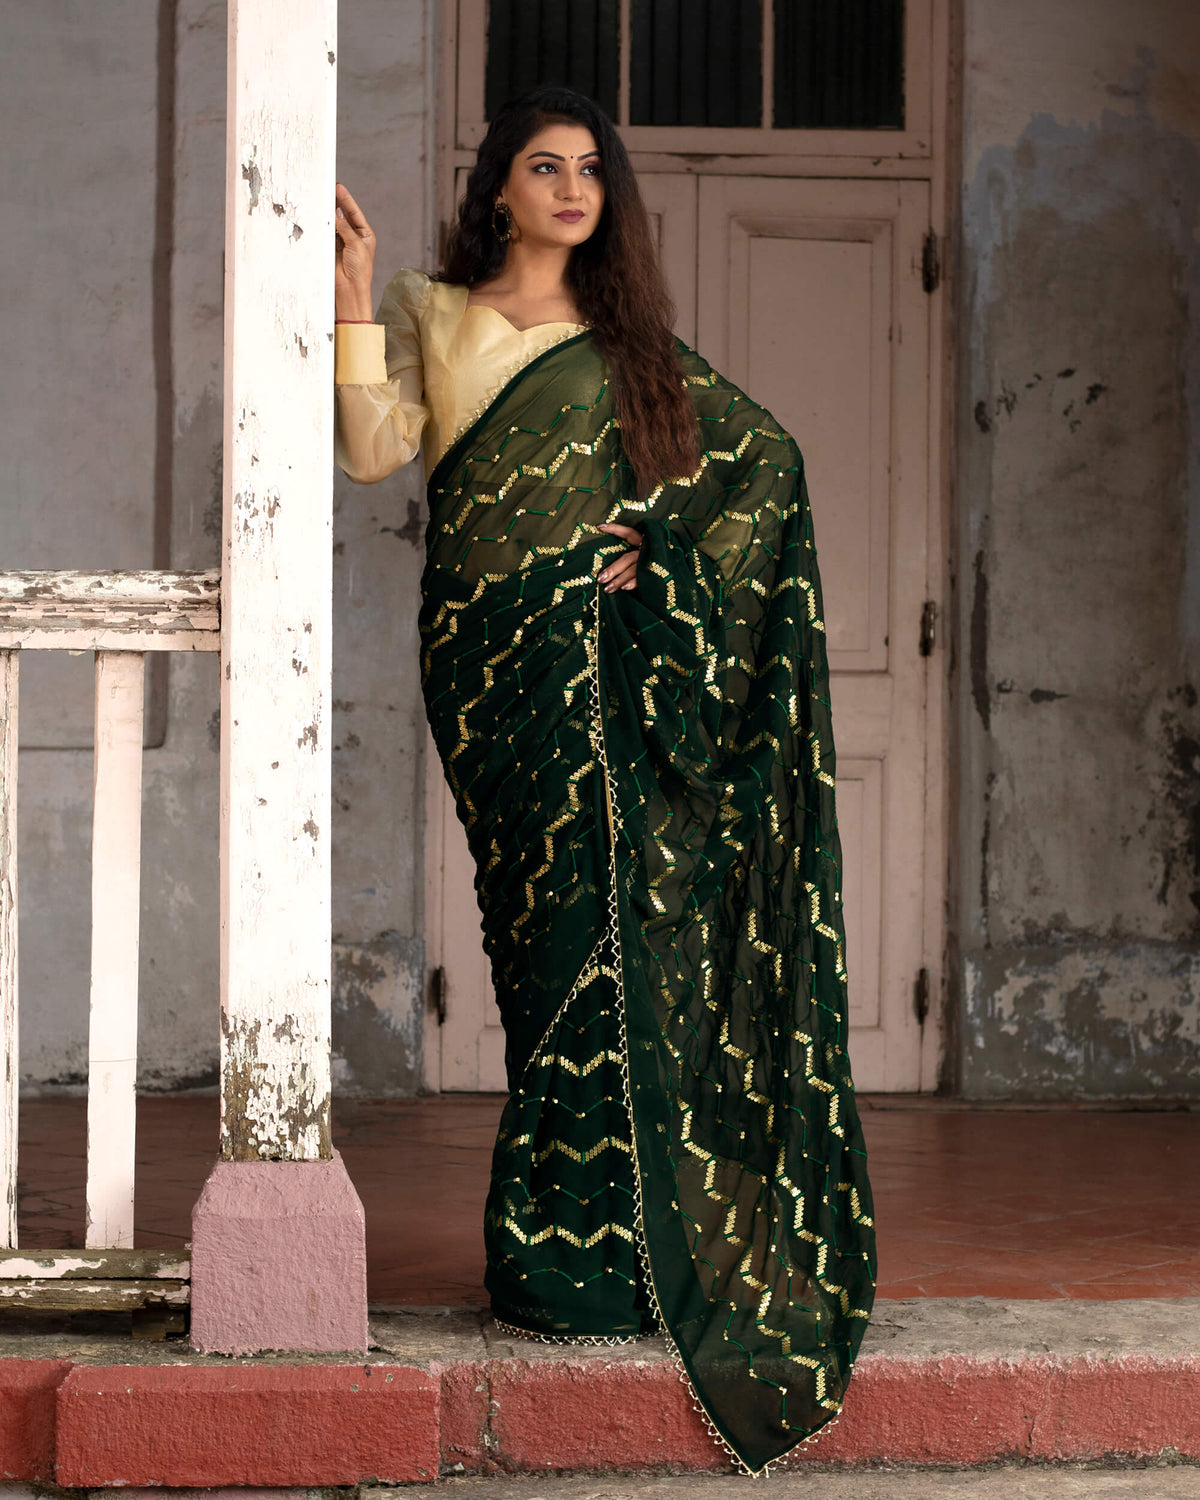 Green Chevron Premium Sequins Georgette Saree with Pearl Work Lace Border